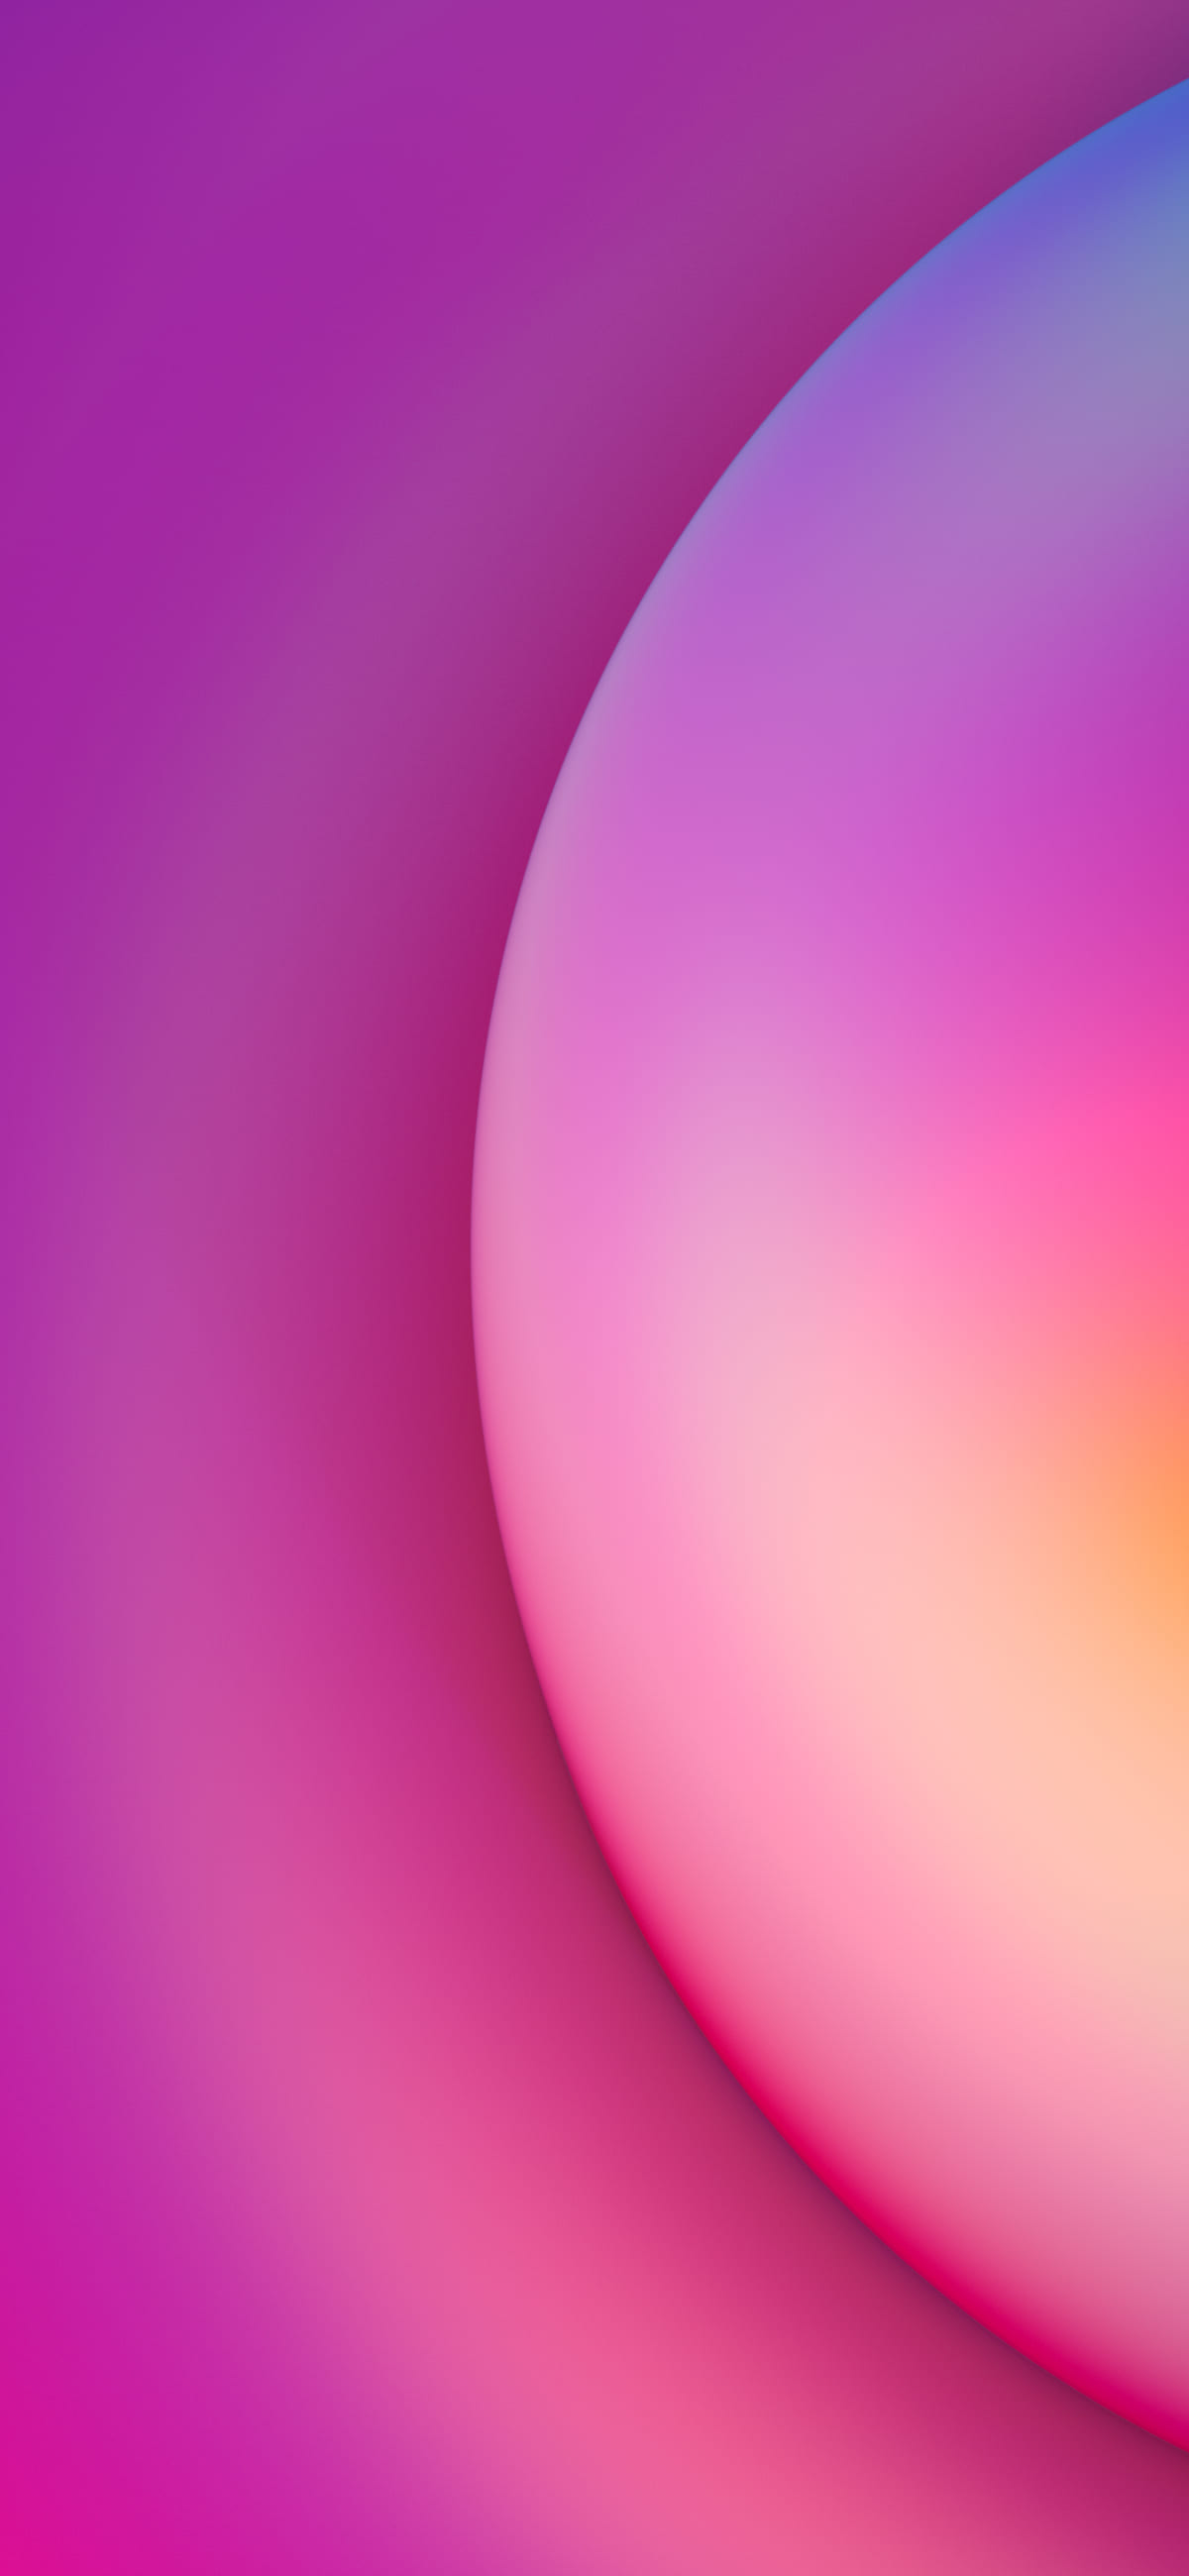 Download iOS 12 Wallpapers (8 Wallpapers) - DroidViews